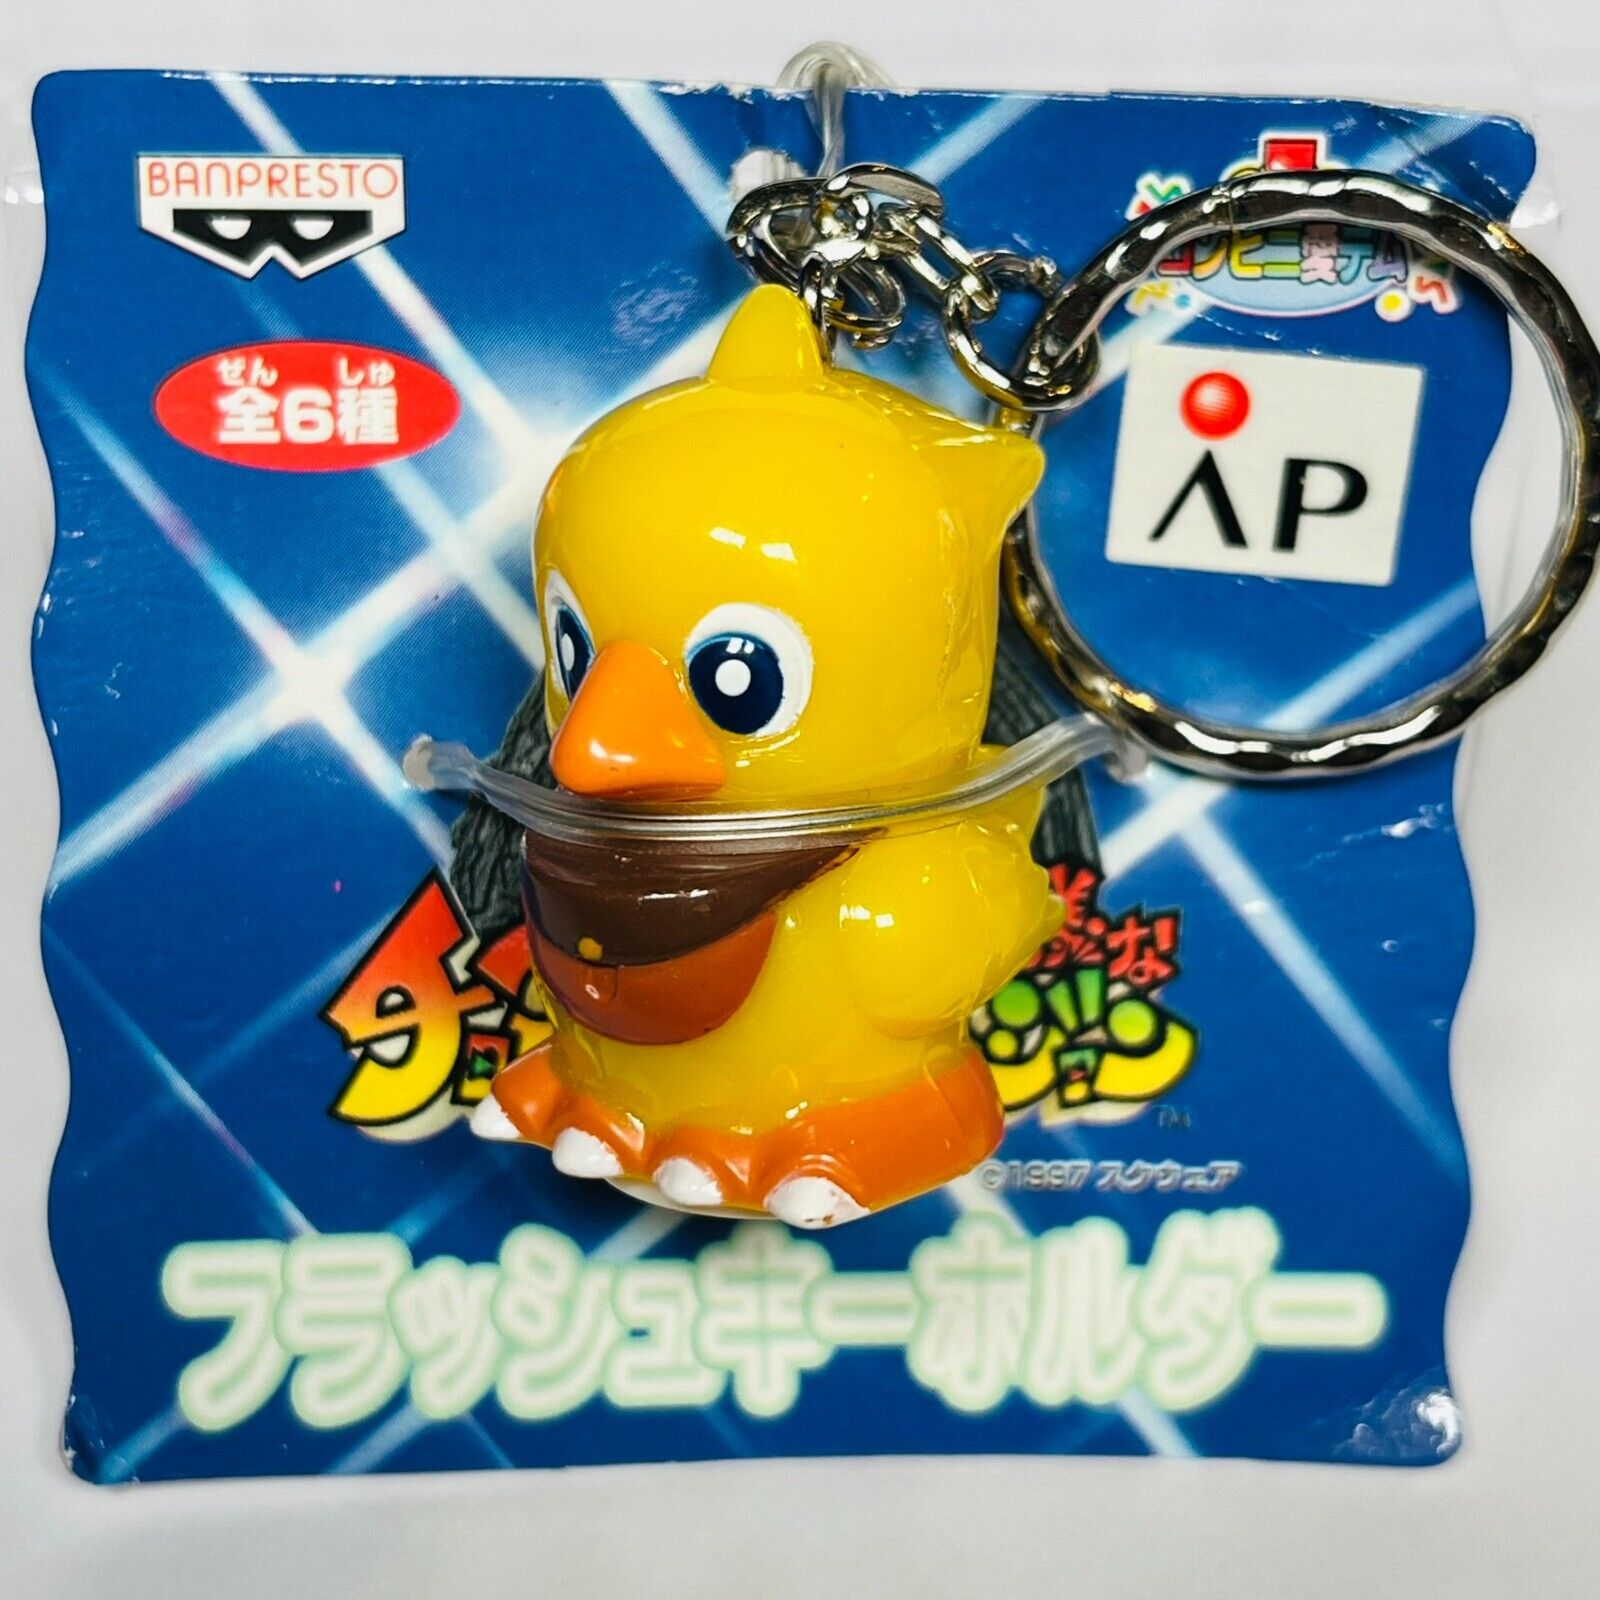 Chocobo Final Fantasy figure keychain - Chocobo Dungeon vintage PS1 Style charm